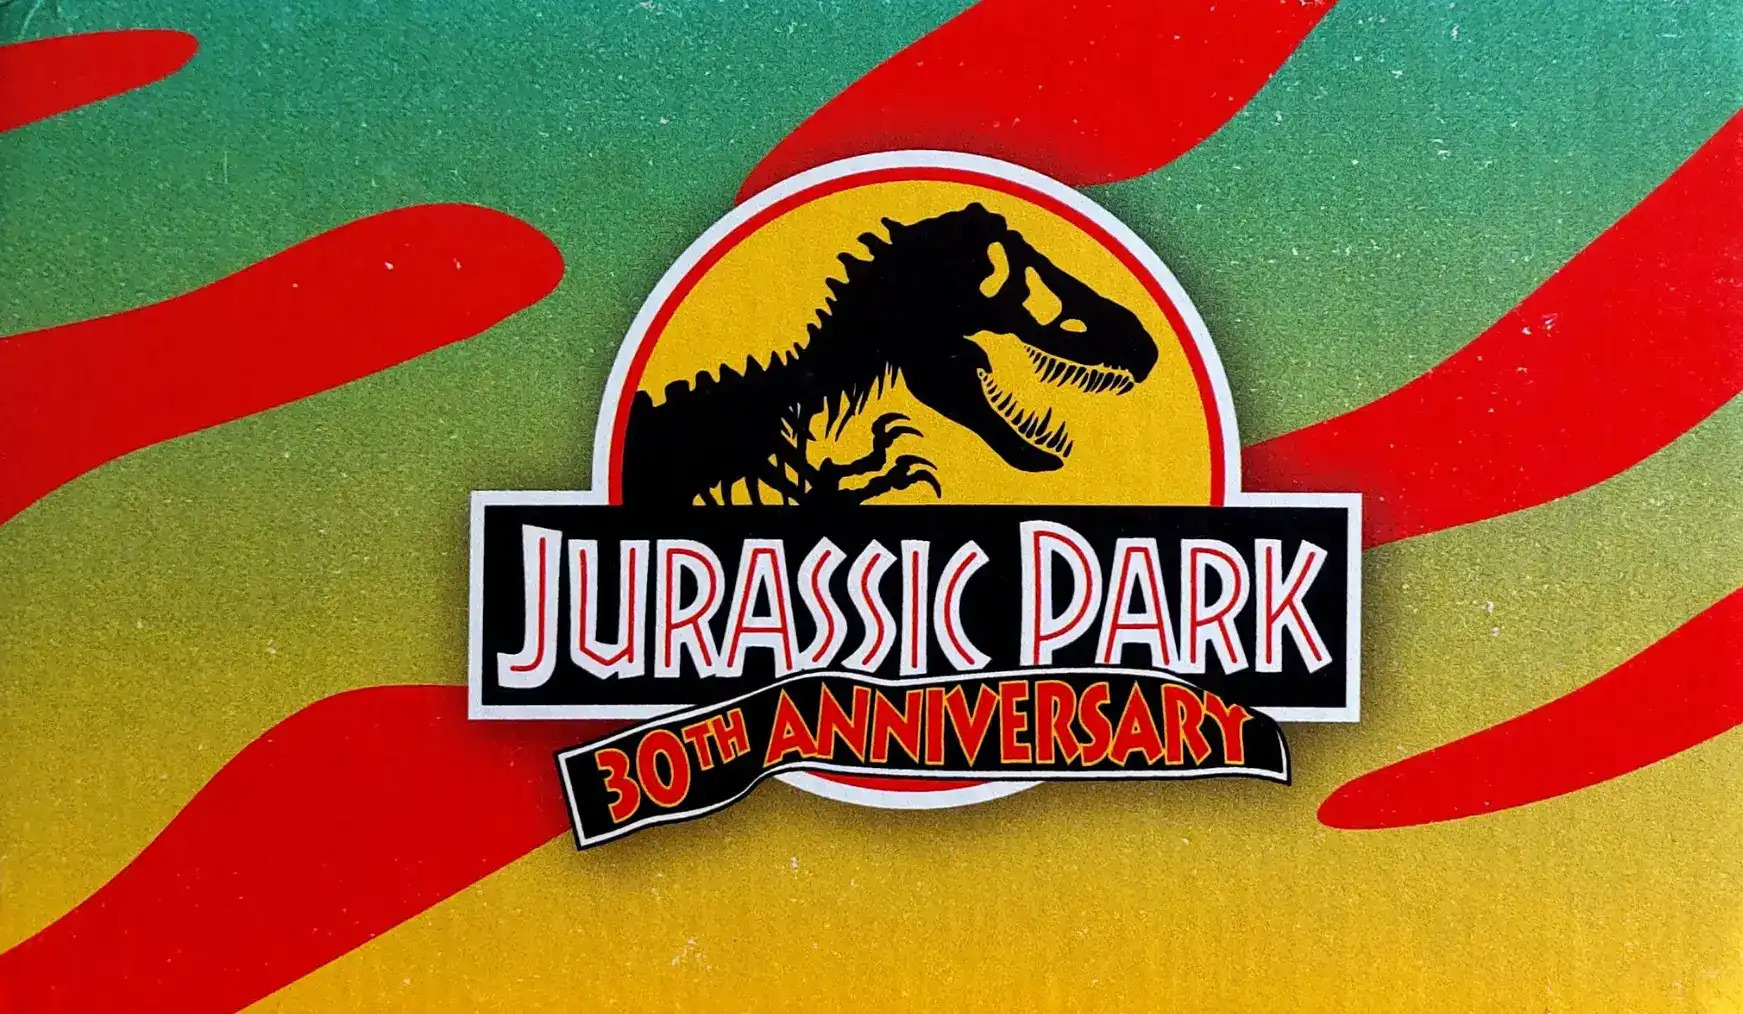 37-facts-about-the-movie-jurassic-park